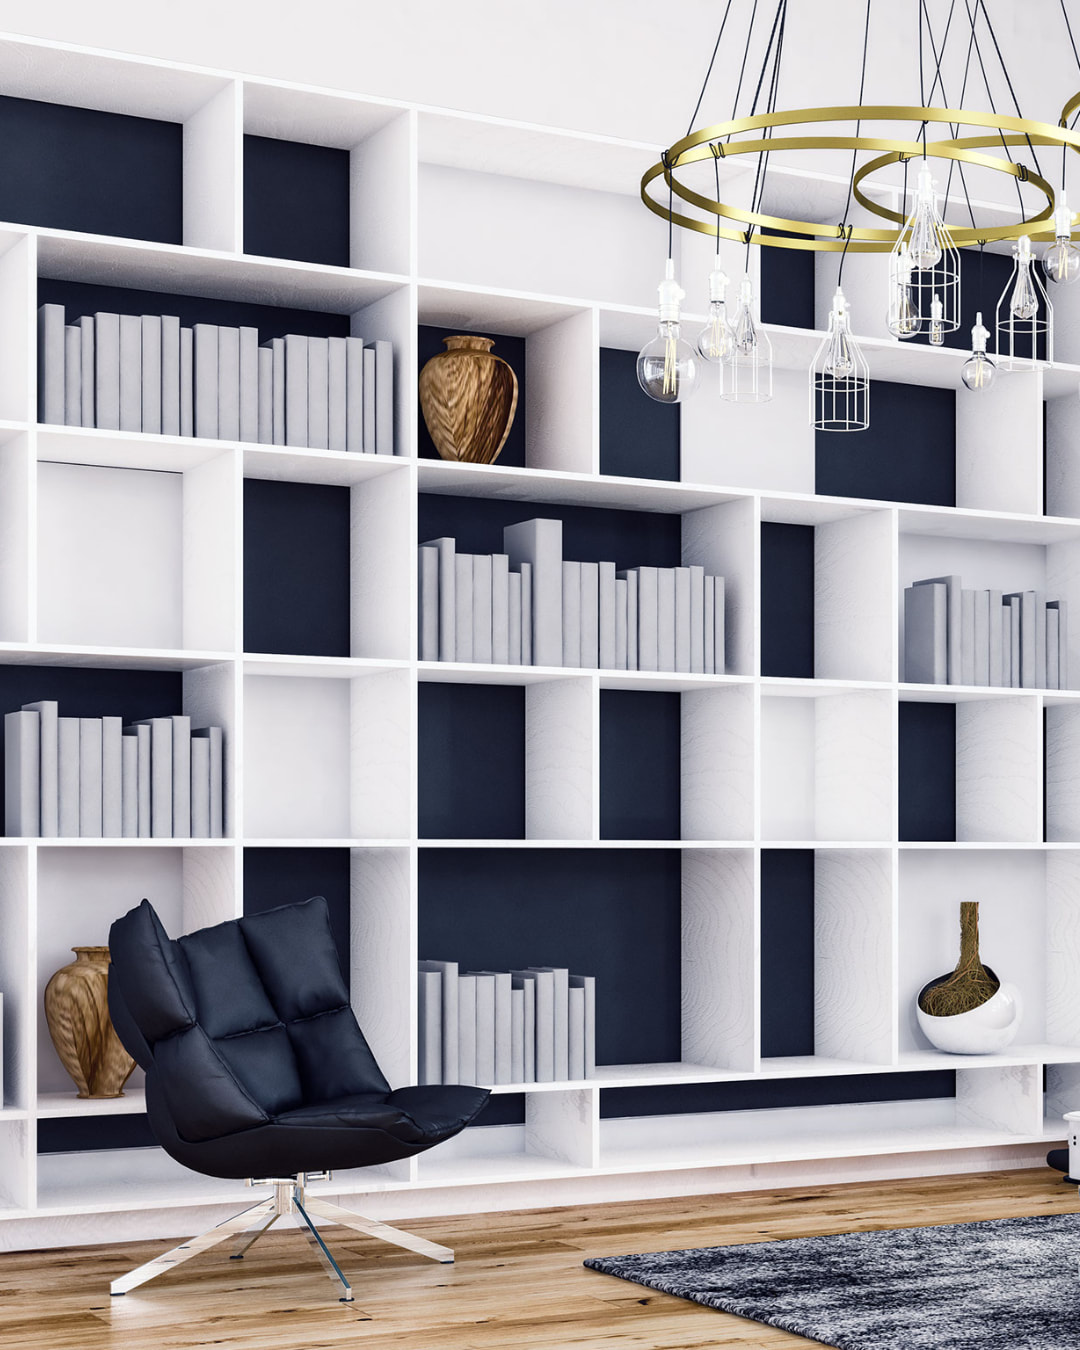 Unique custom bookcase for home office storage solutions - white with dark navy backing, every other book case pocket - custom library solutions for your home office - Lake Charles LA - ShelveIt